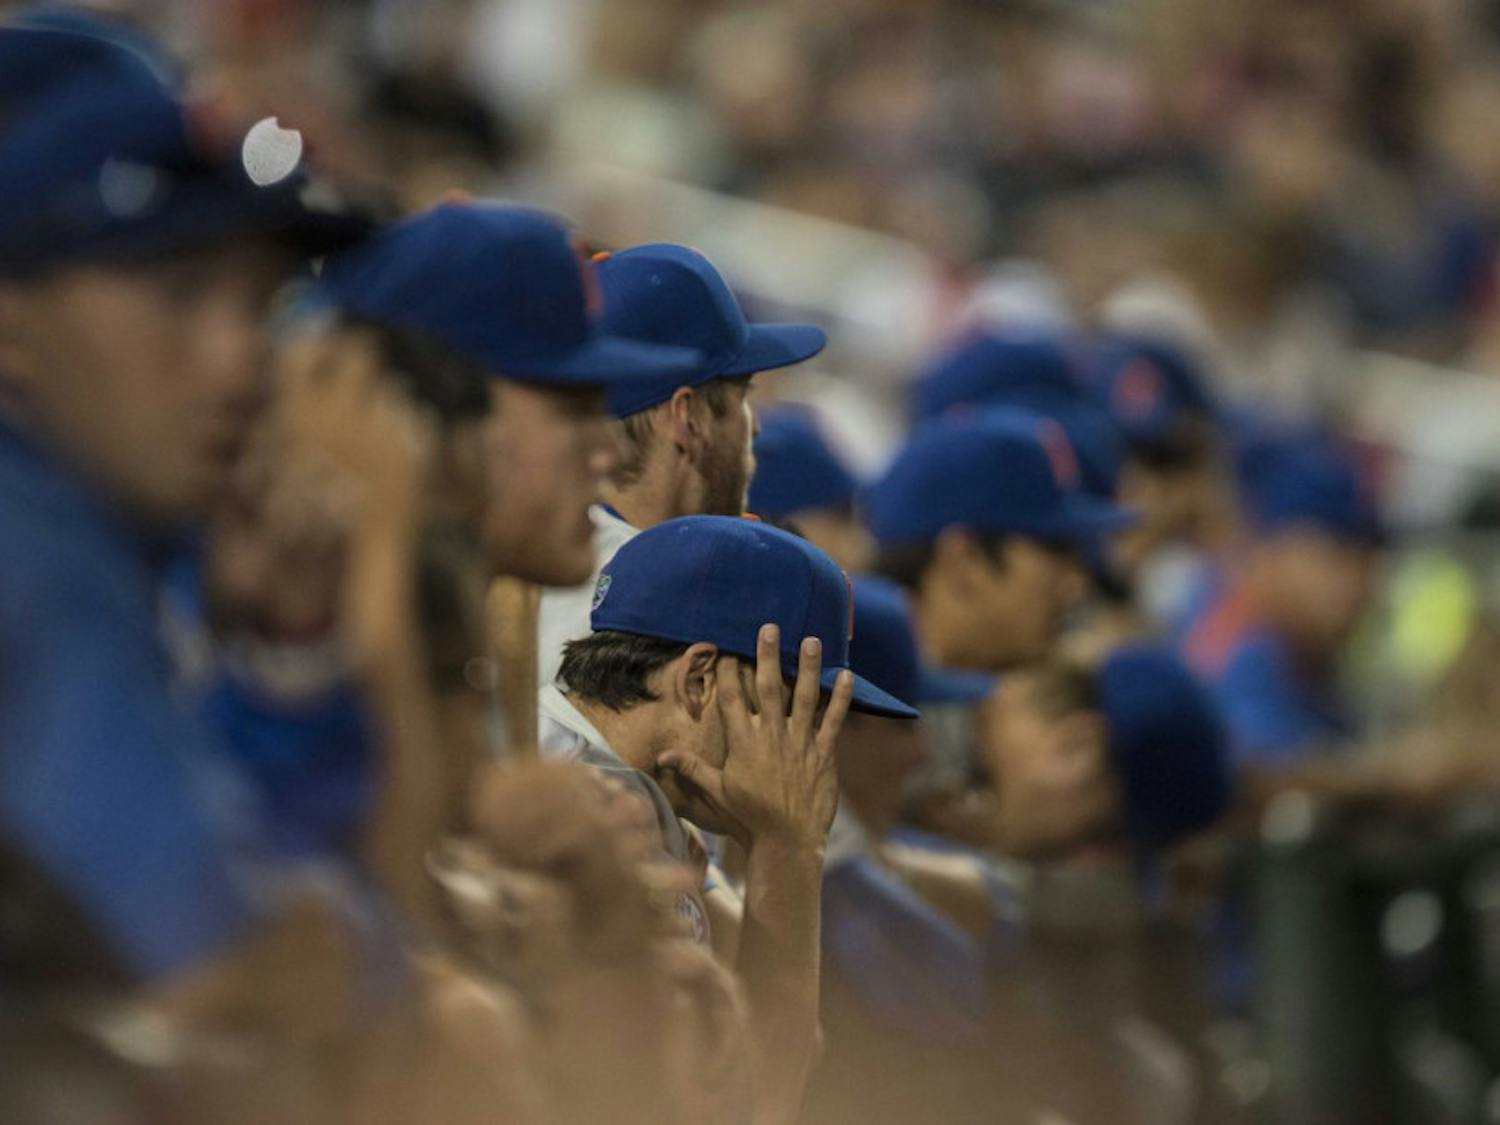 Florida players watch from the dugout during the Gators' 1-0 loss against Virginia in the NCAA Men's College World Series on Monday, June 15, 2015 at TD Ameritrade Park in Omaha.